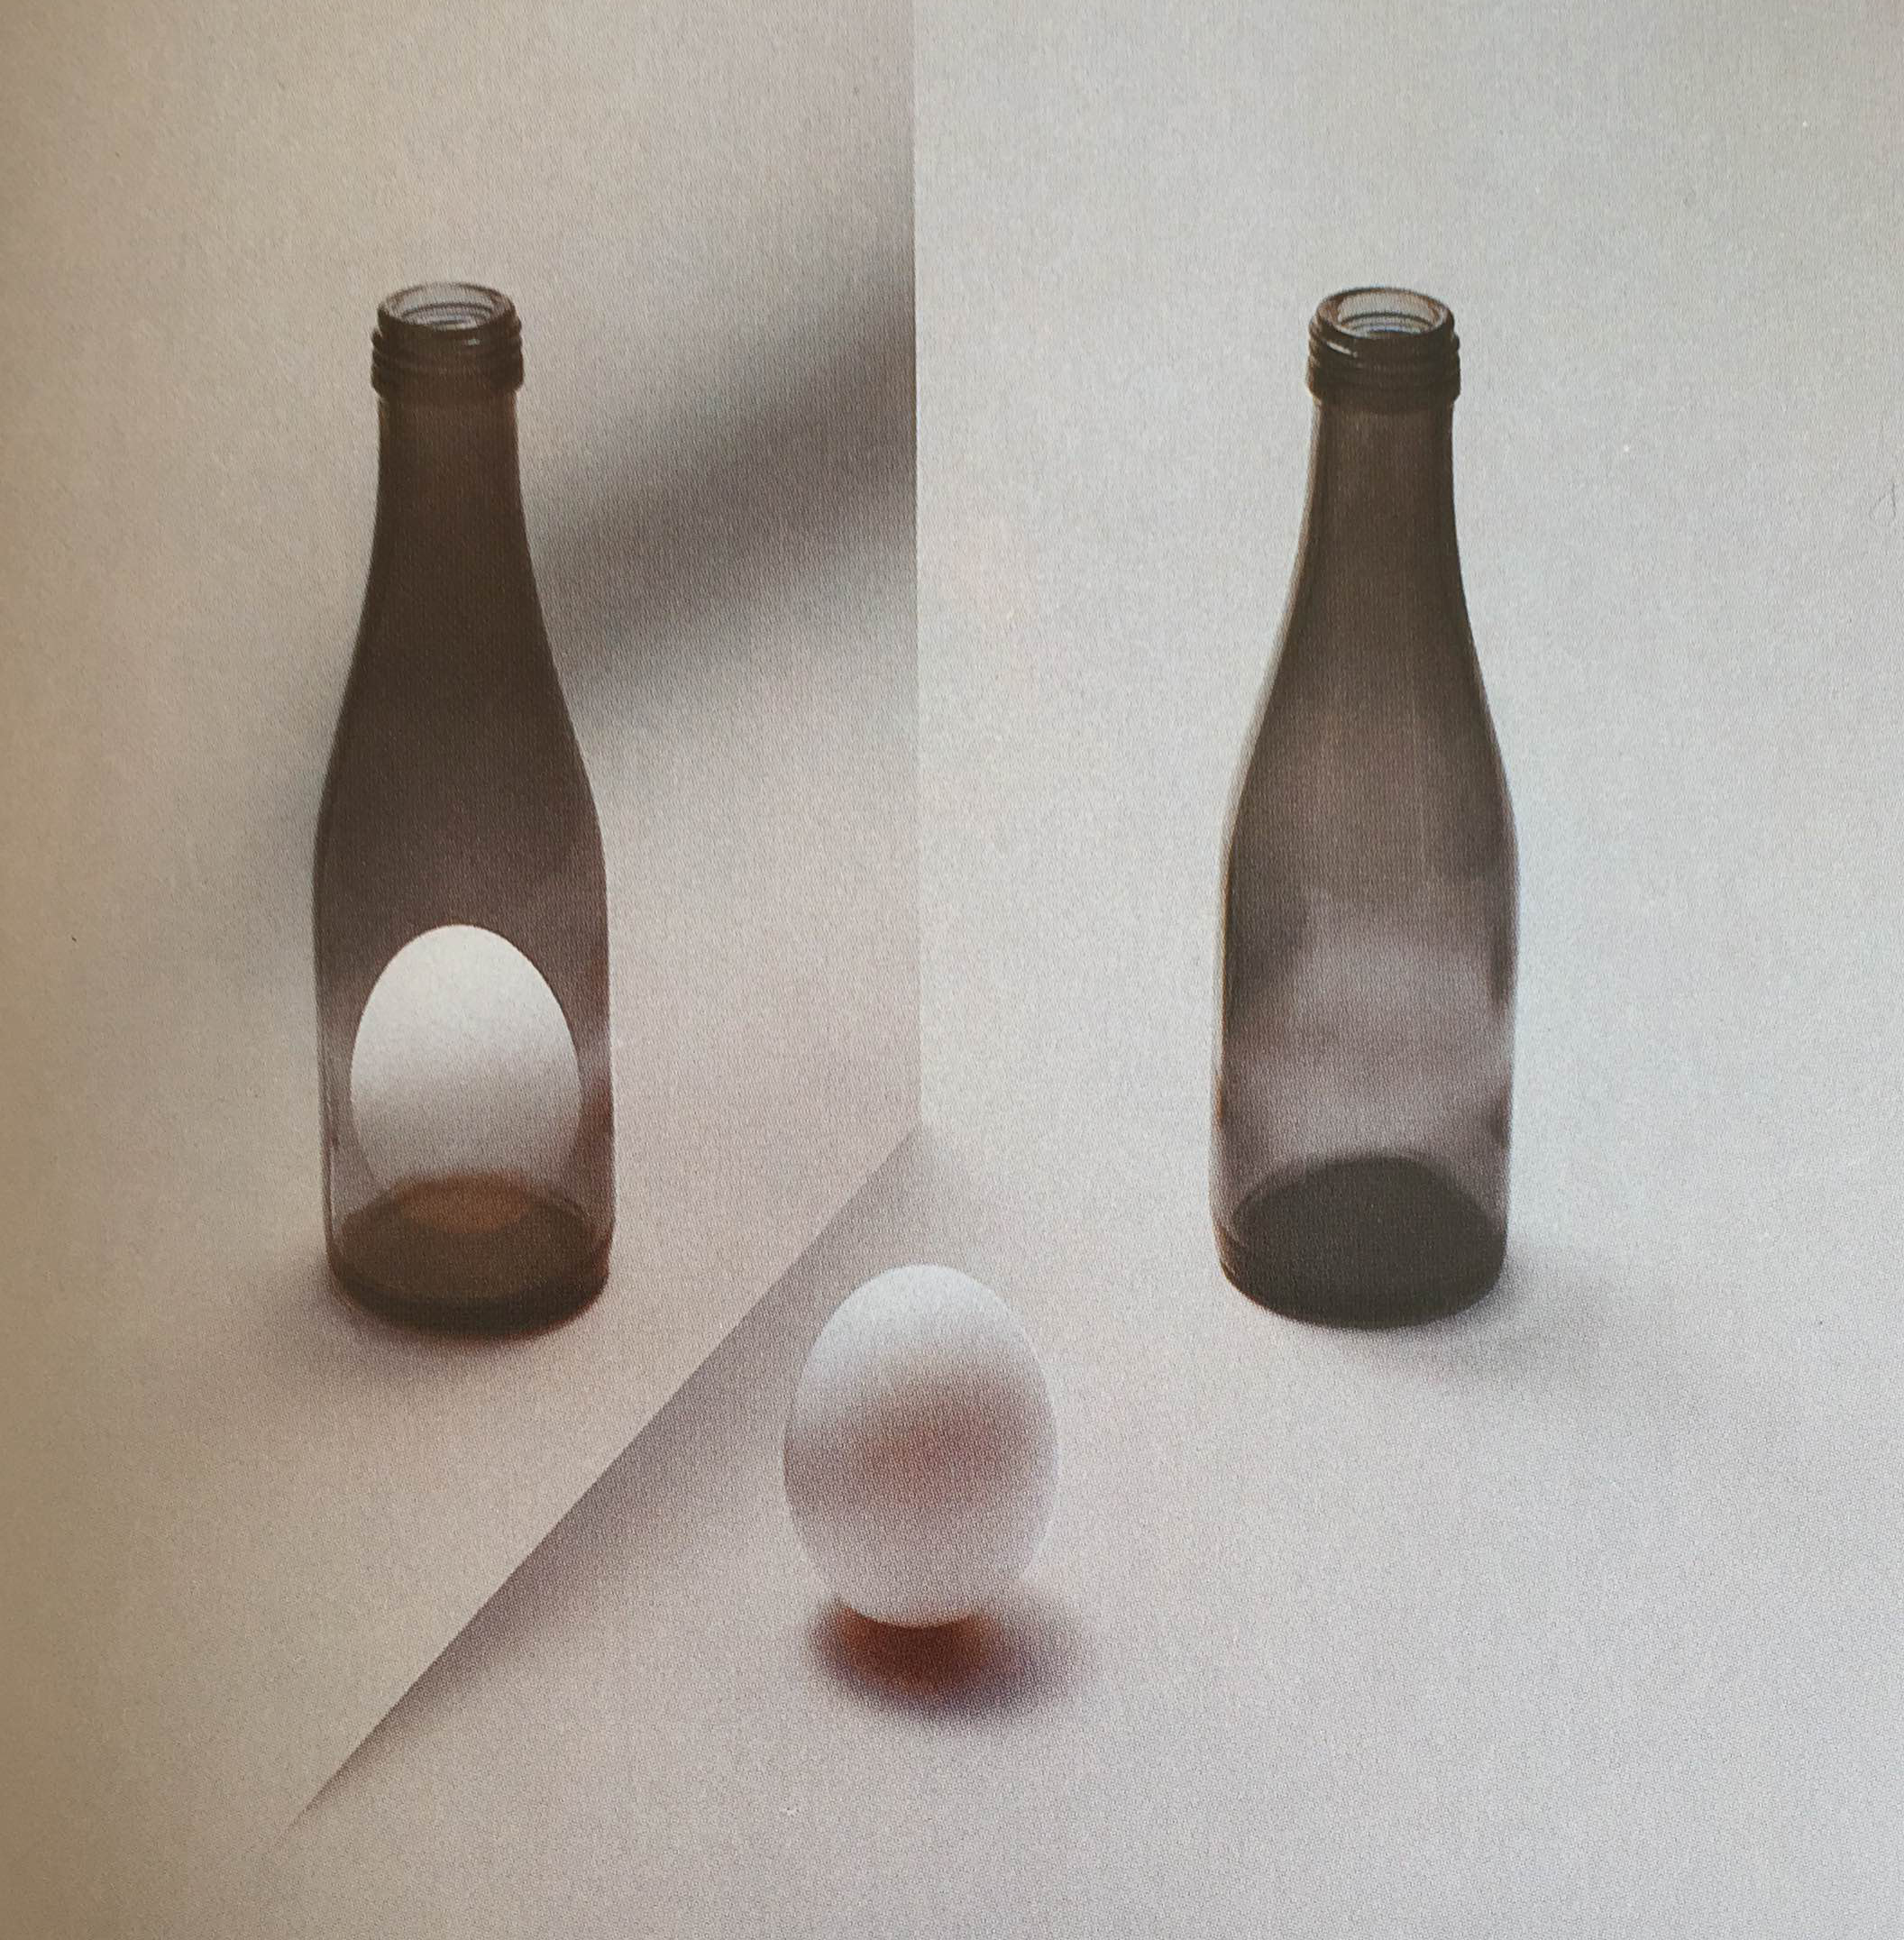 A photograph of an egg in the foreground and two bottles in the background. One of the bottles has an egg inside of it